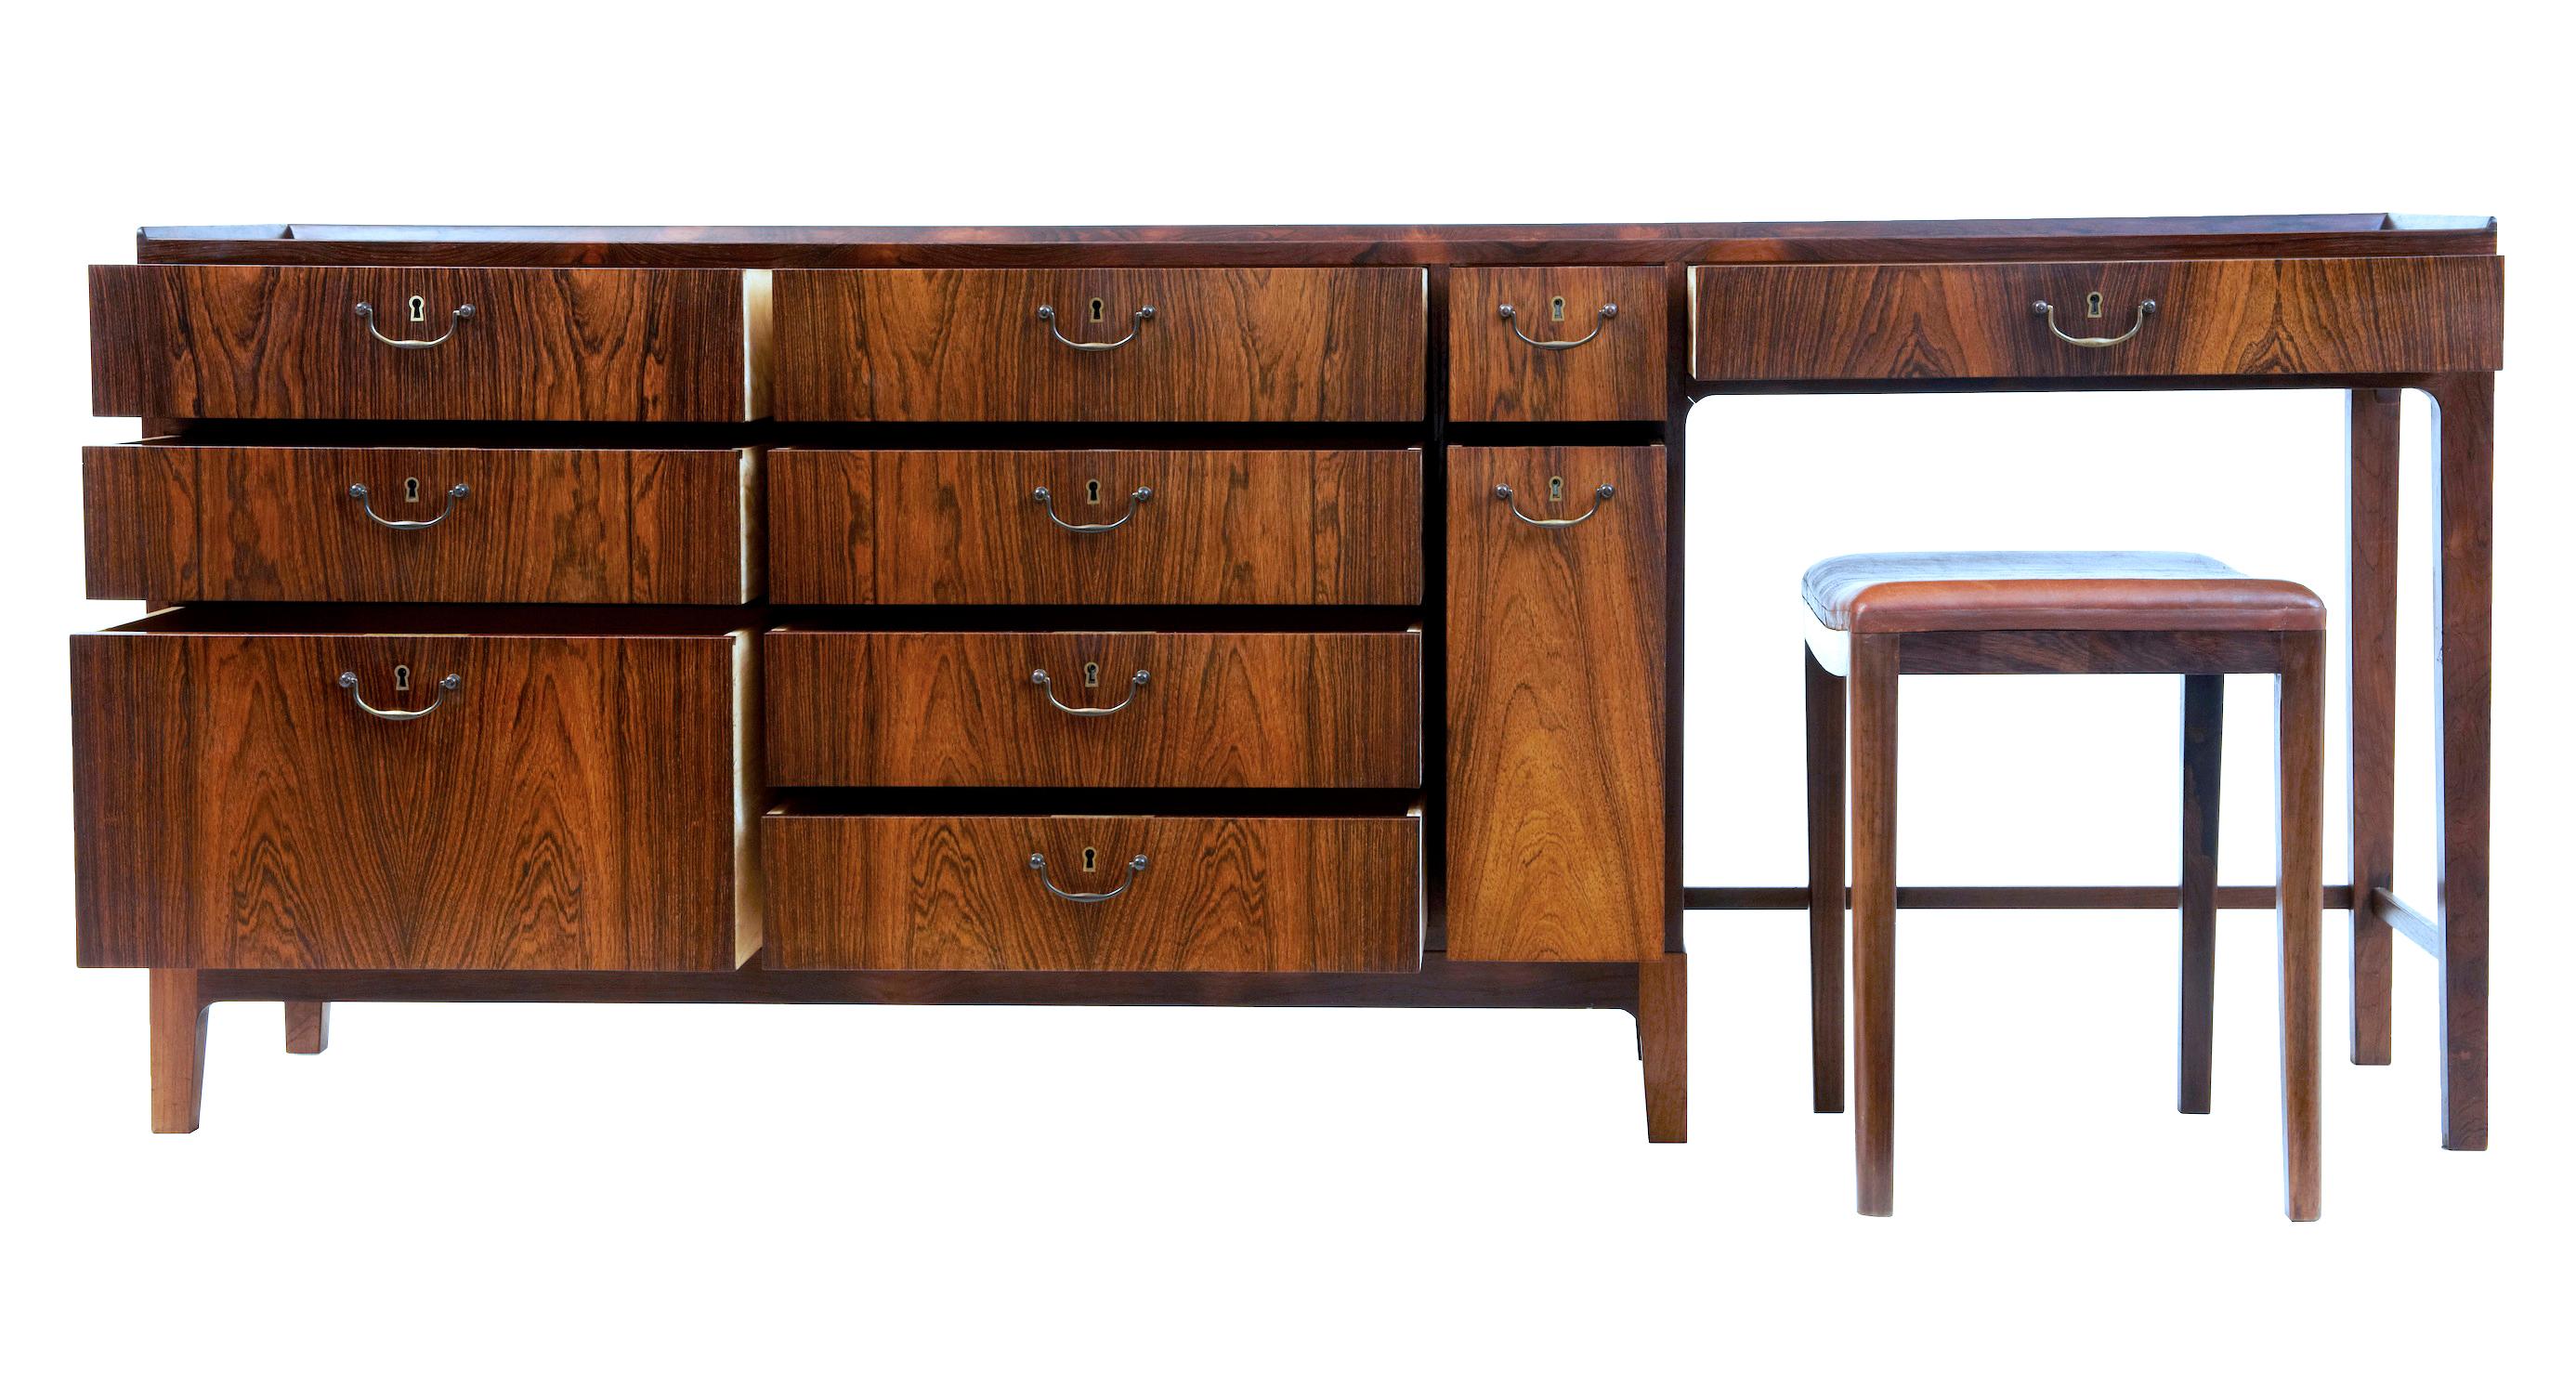 1960s Danish design palisander dressing sideboard by frode holm, circa 1960.

Stunning sideboard or large dressing table veneered in rich palisander. Top surface with short gallery border. Fitted with various sized drawers and brass swan neck